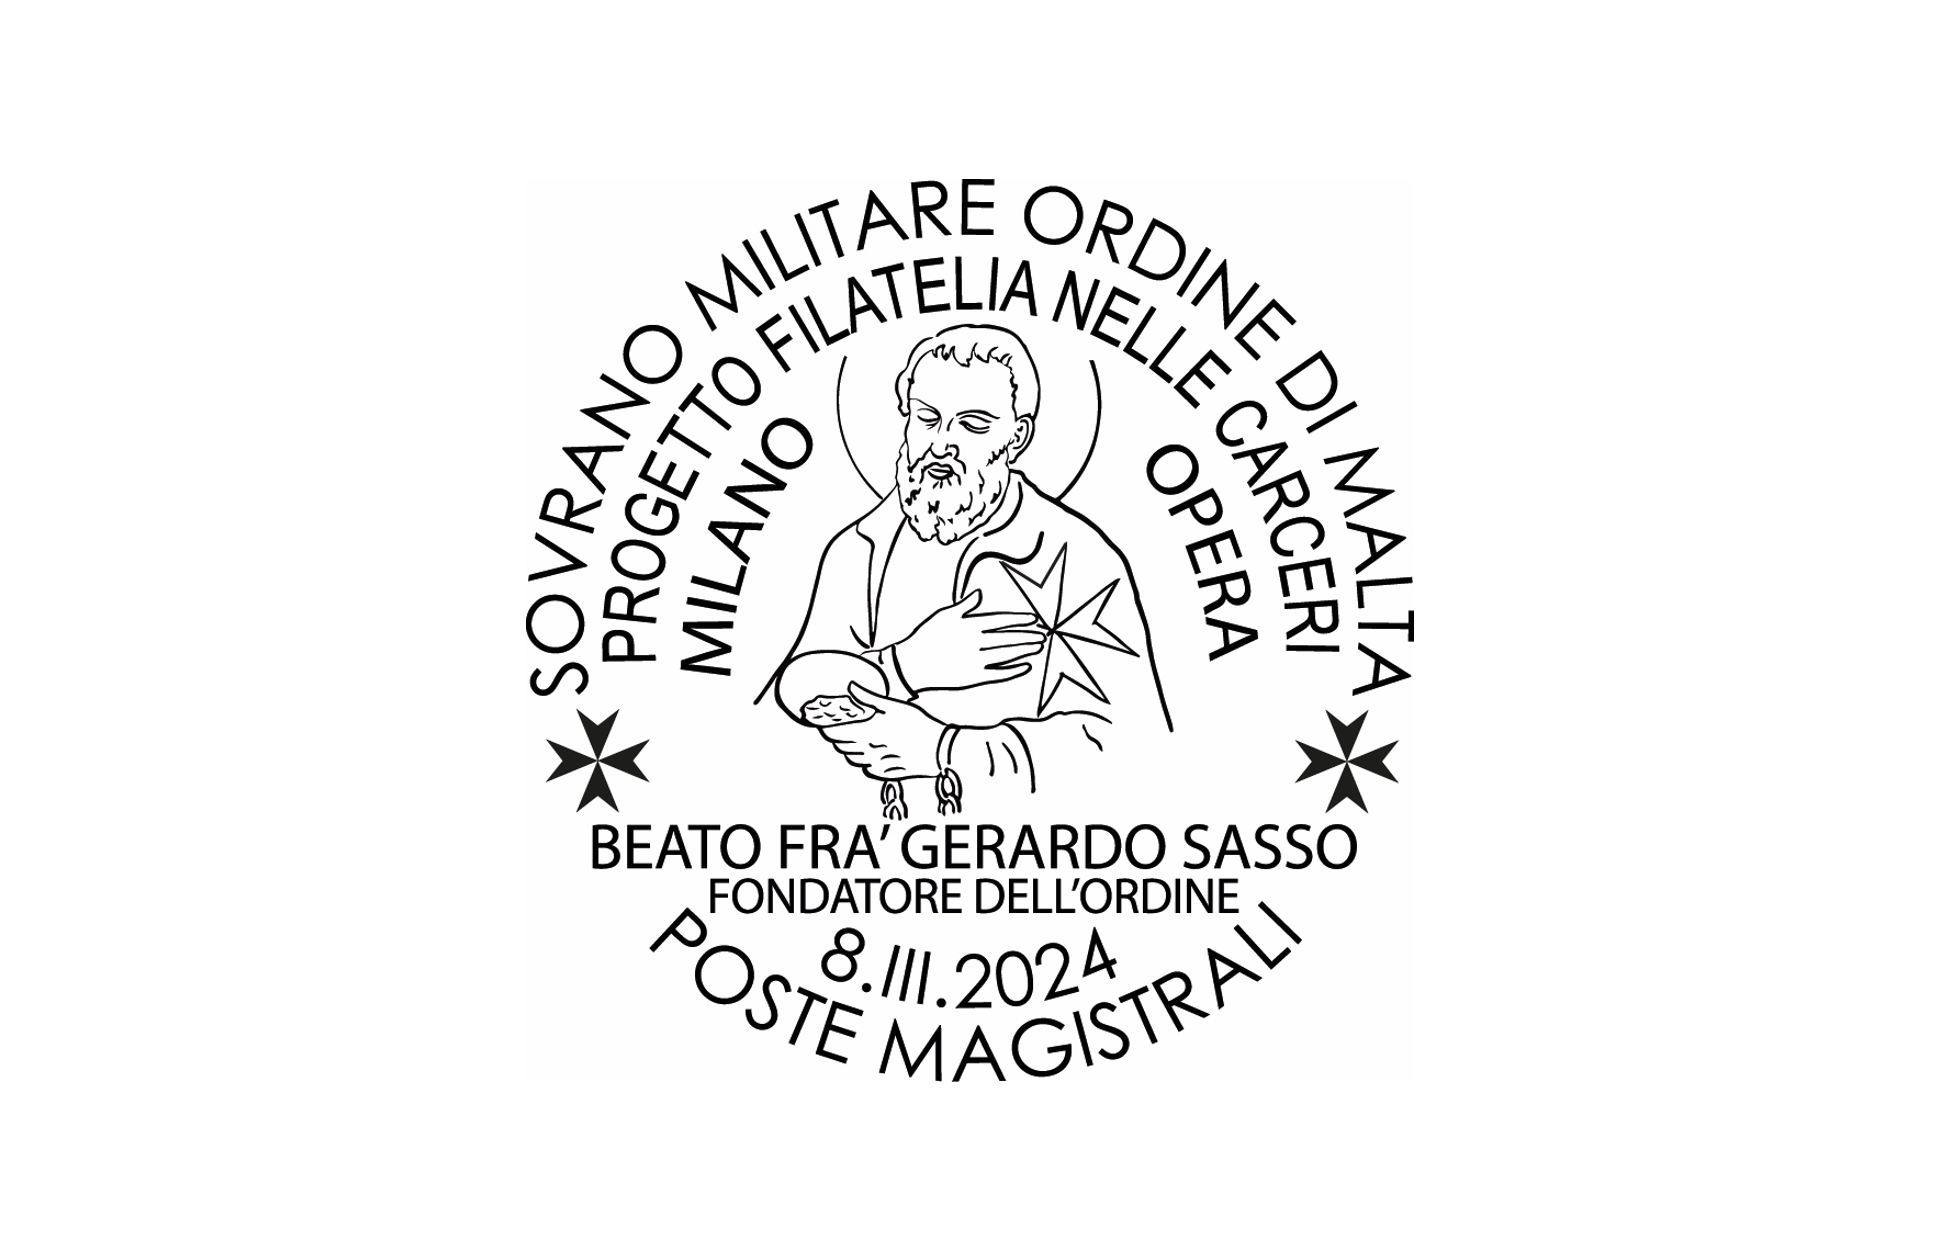 Poste Magistrali supports the “Philately in prisons” project